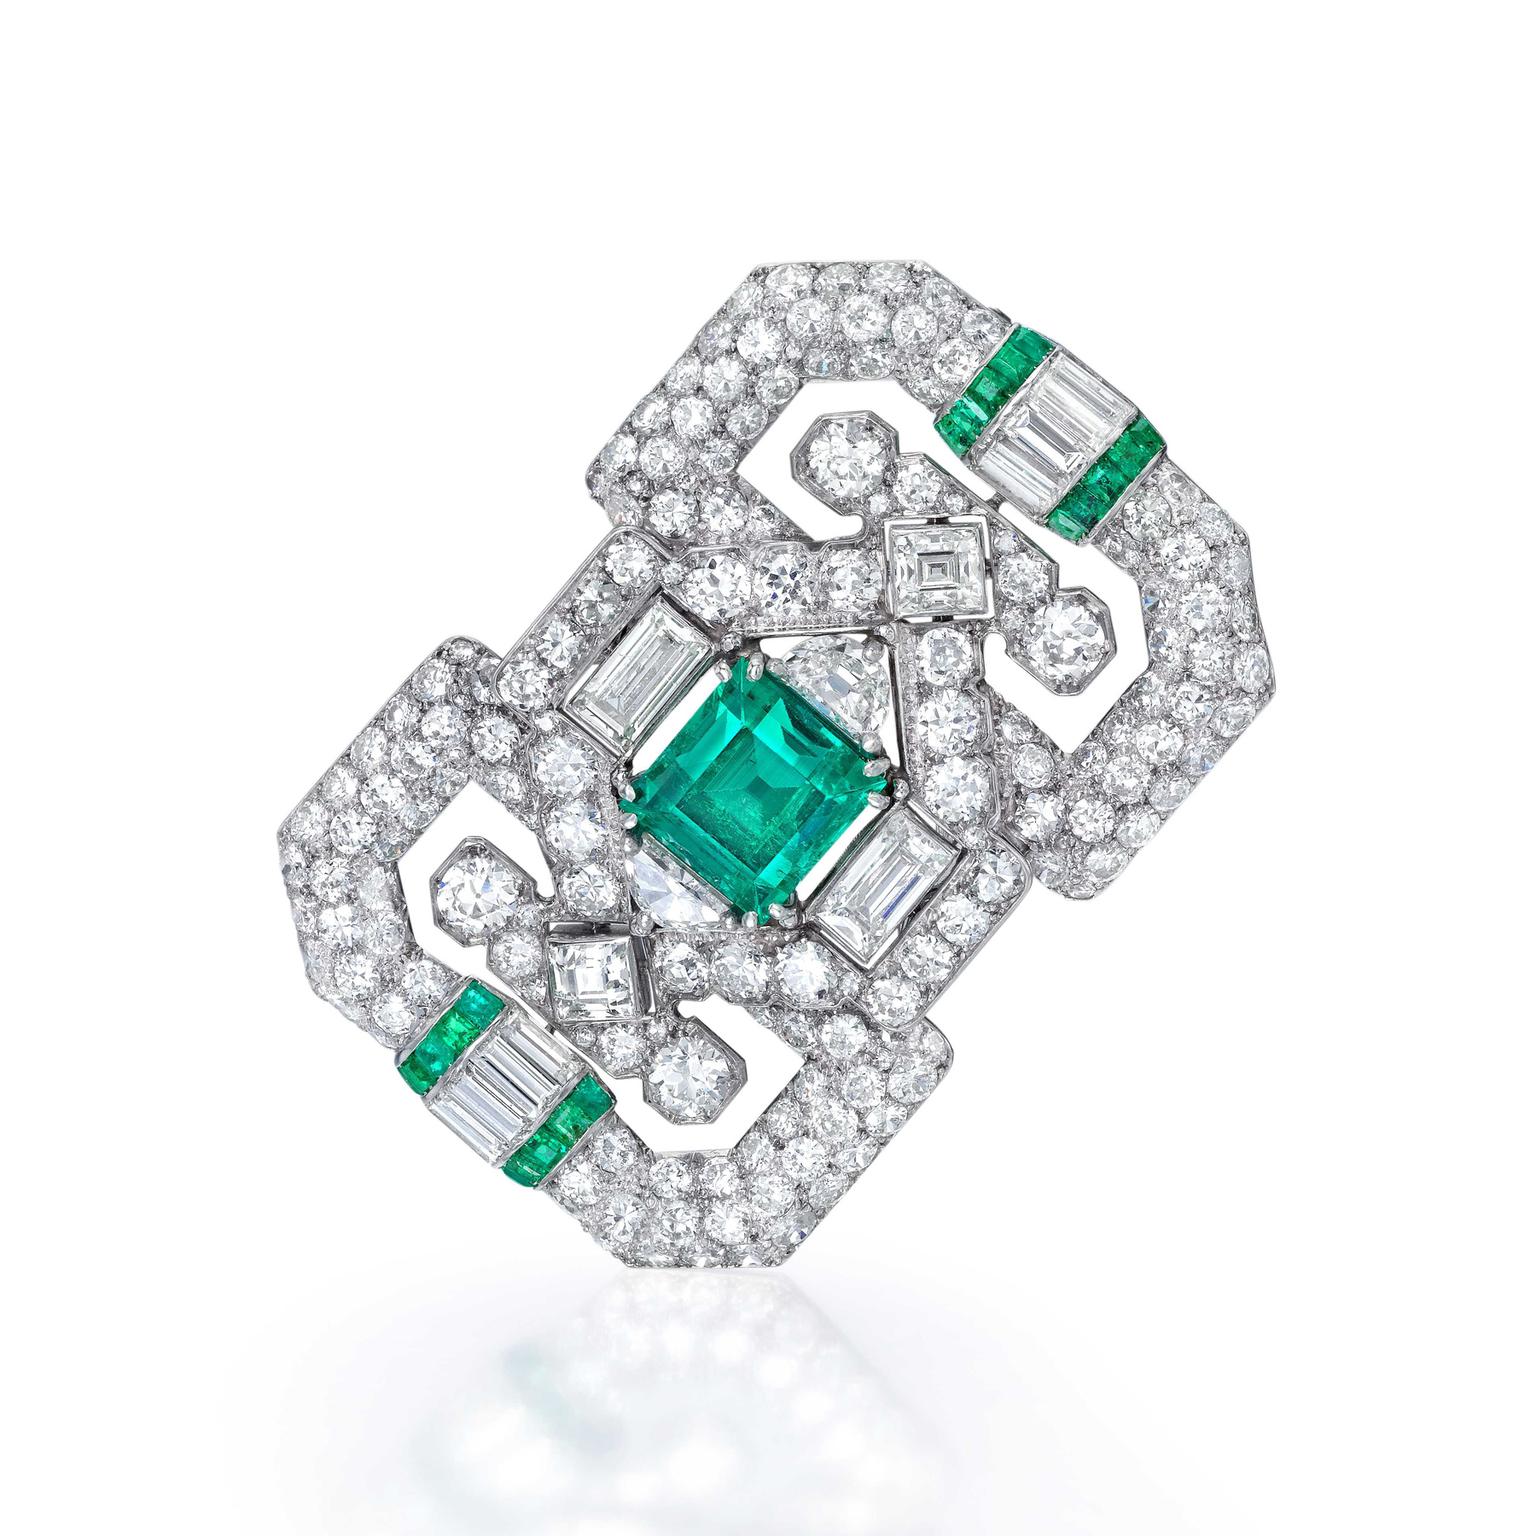 Jackie Collins' emerald and diamond French brooch